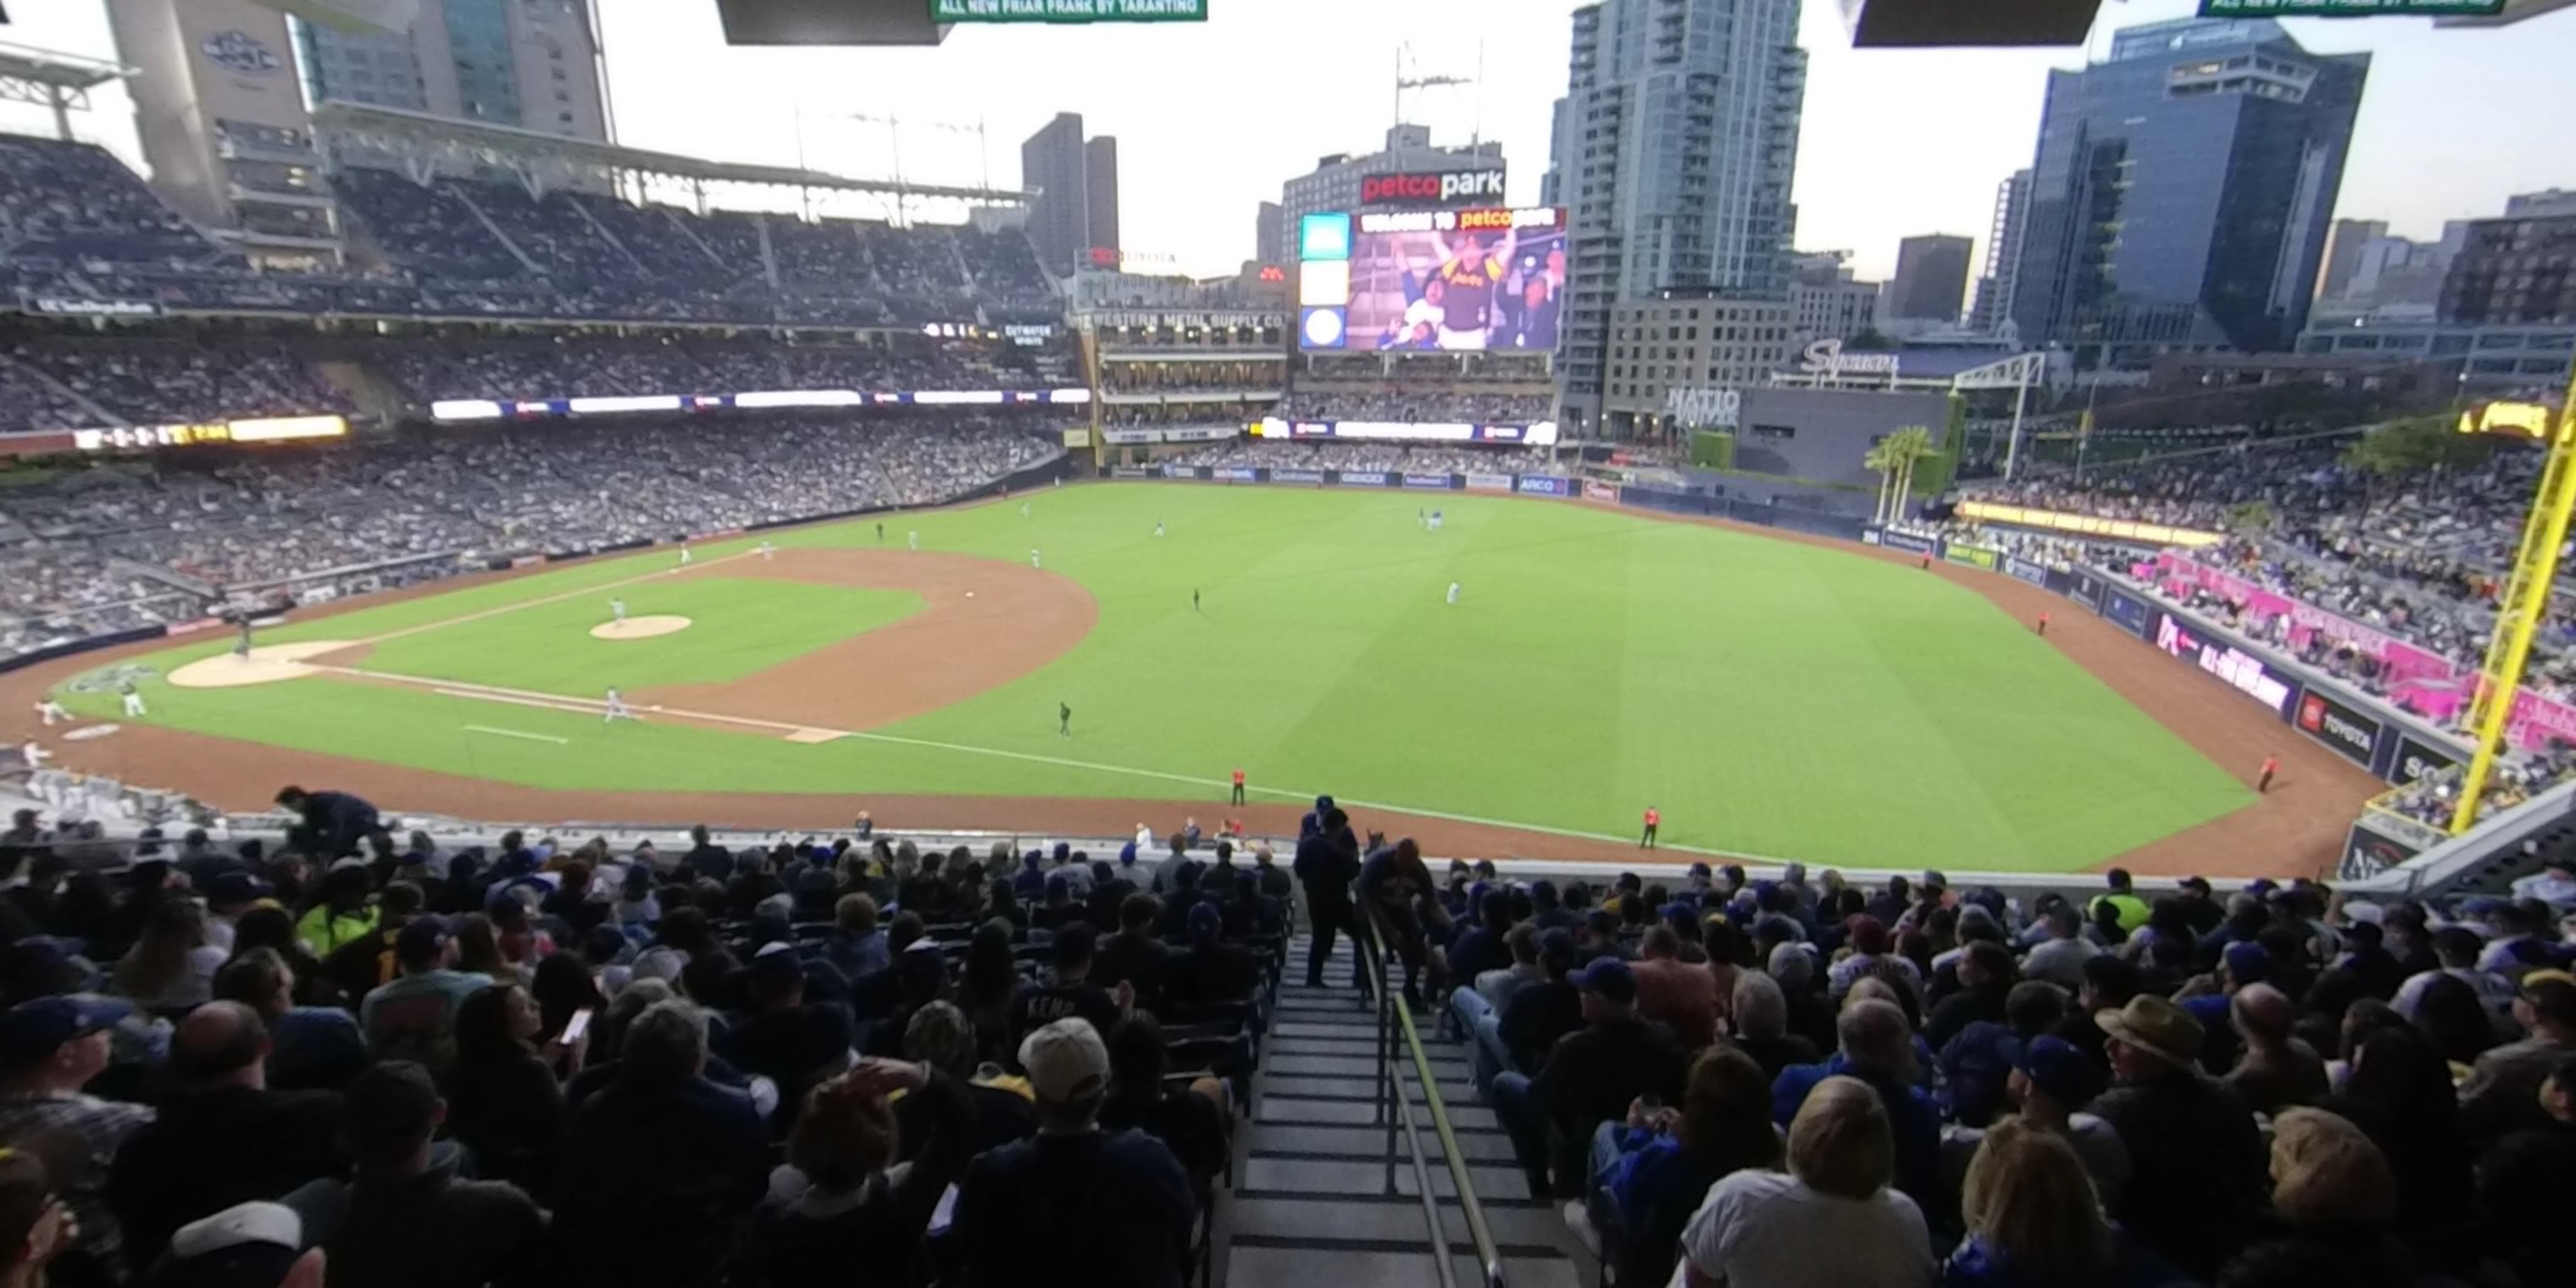 section 215 panoramic seat view  for baseball - petco park